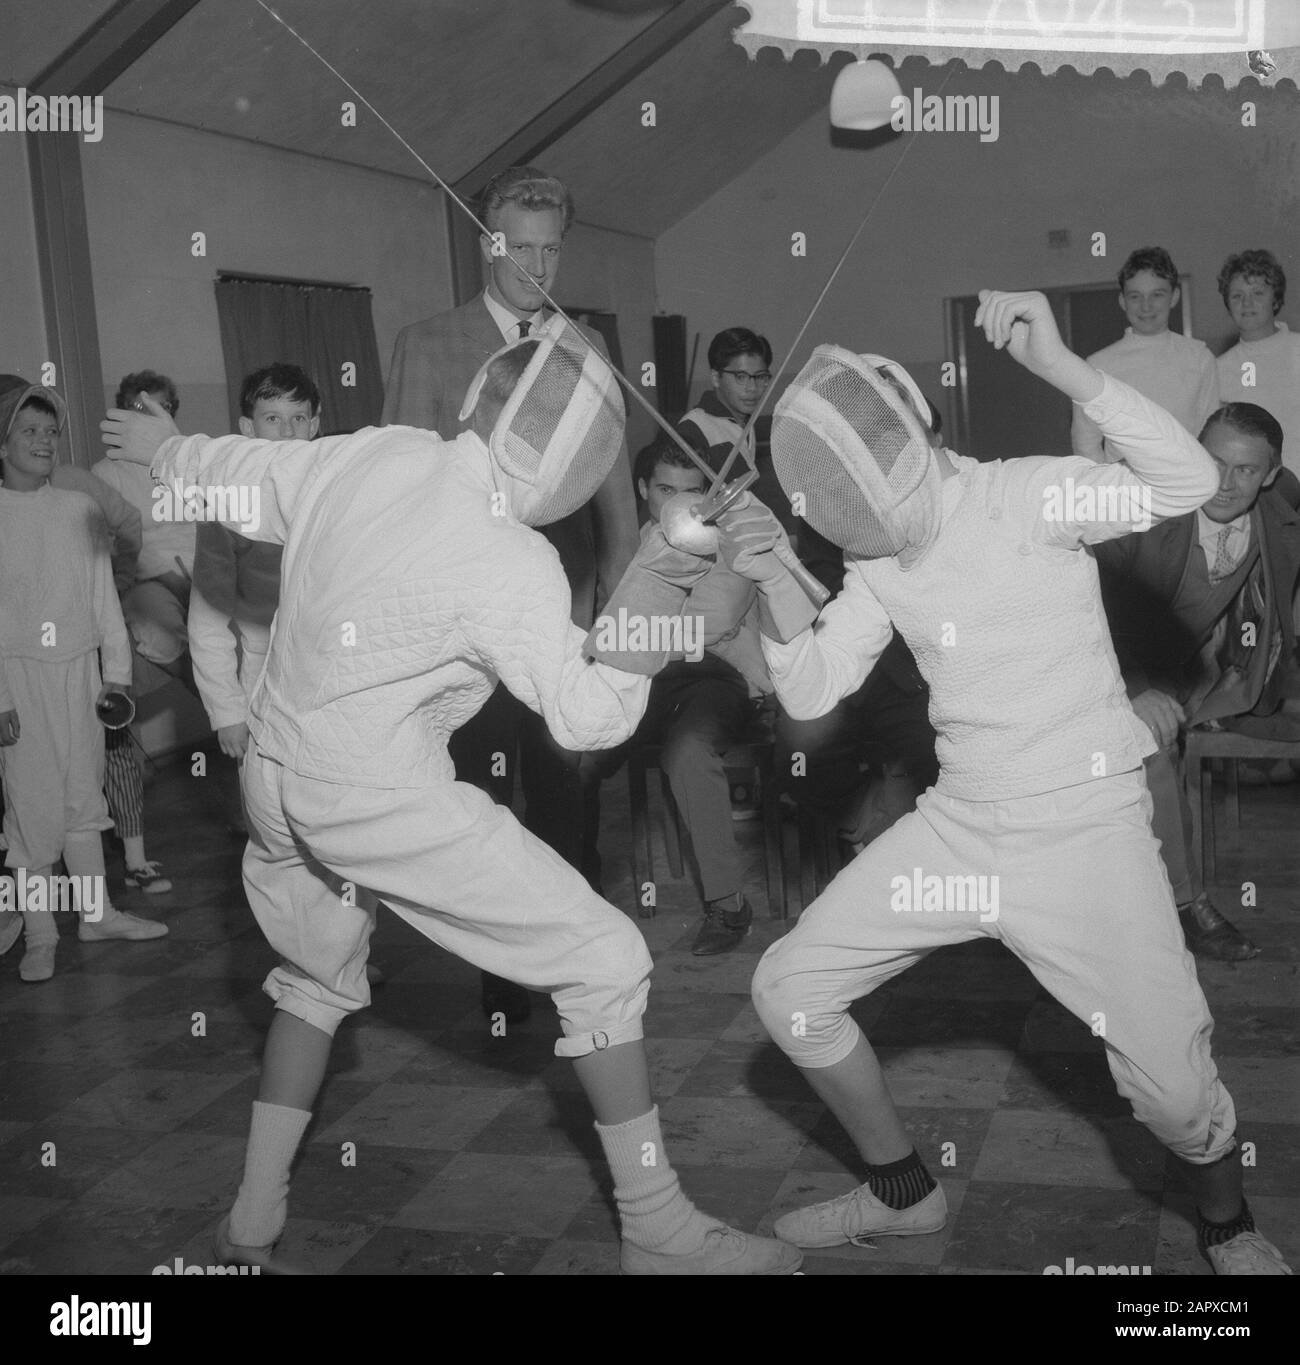 Assignment Boys on the screens Date: October 25, 1960 Keywords: BOYS, FENCING, Assignments Stock Photo